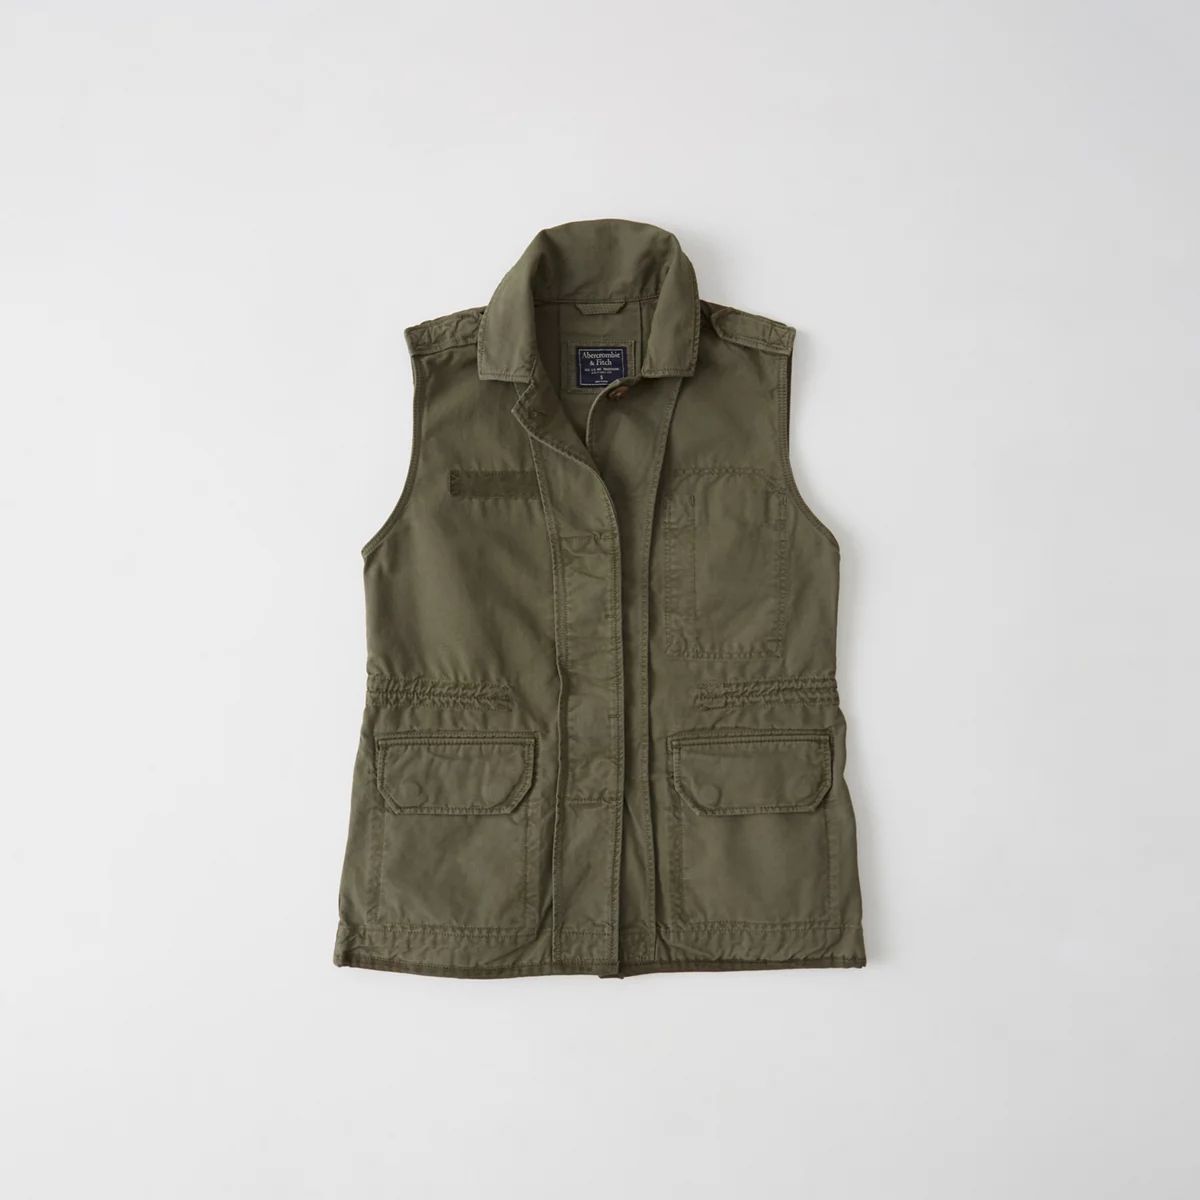 Military Vest | Abercrombie & Fitch US & UK